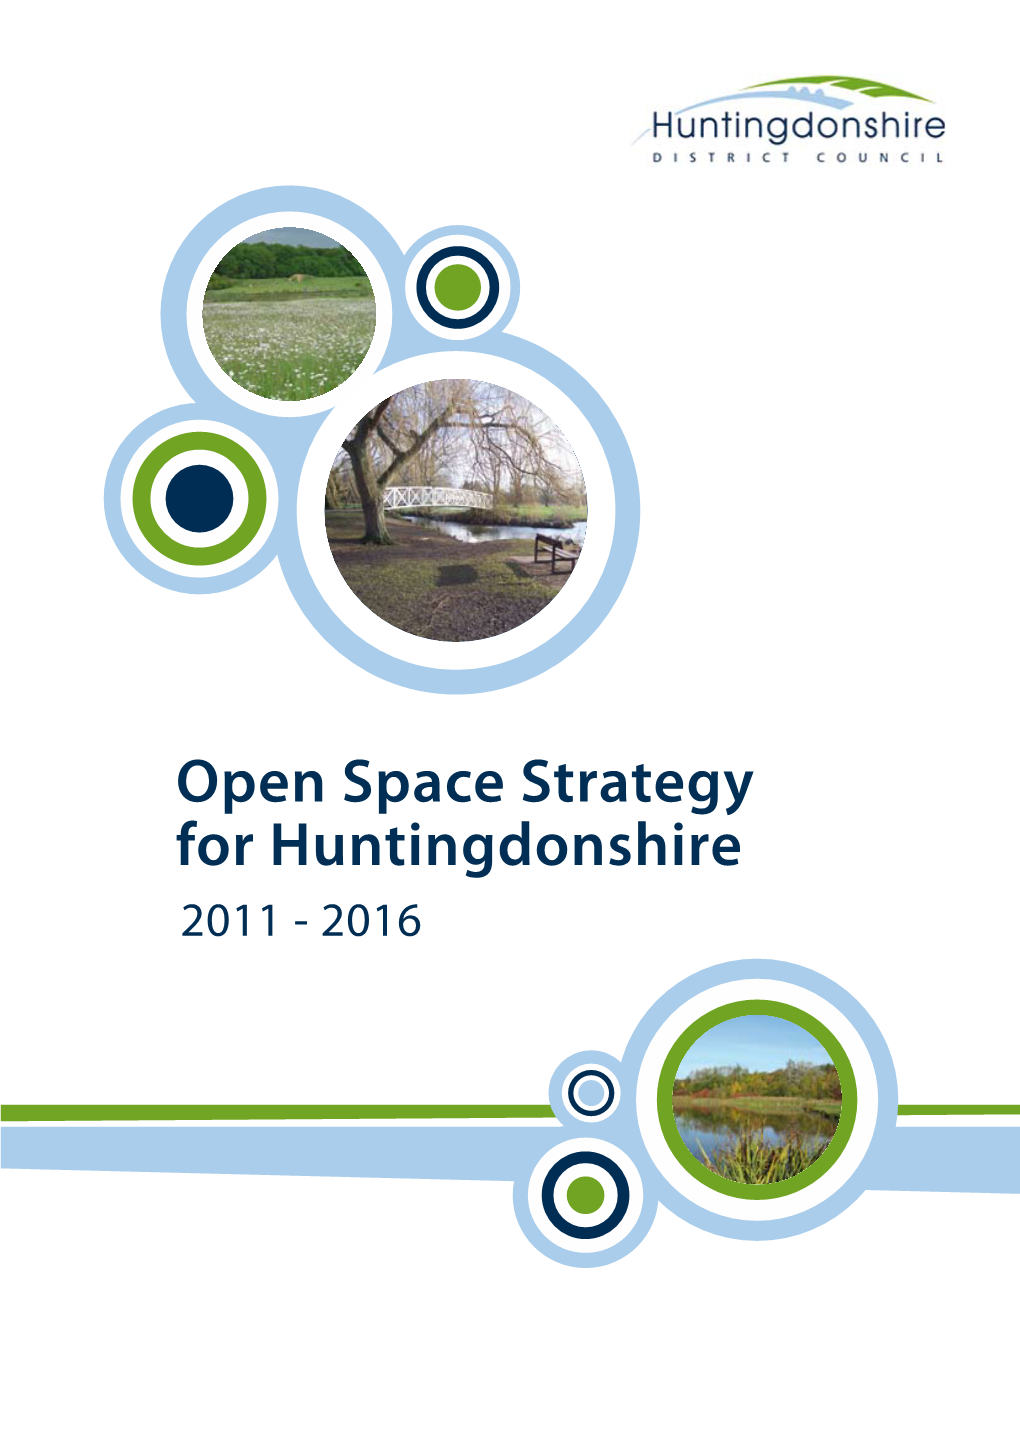 Open Space Strategy for Huntingdonshire 2011 - 2016 Foreword